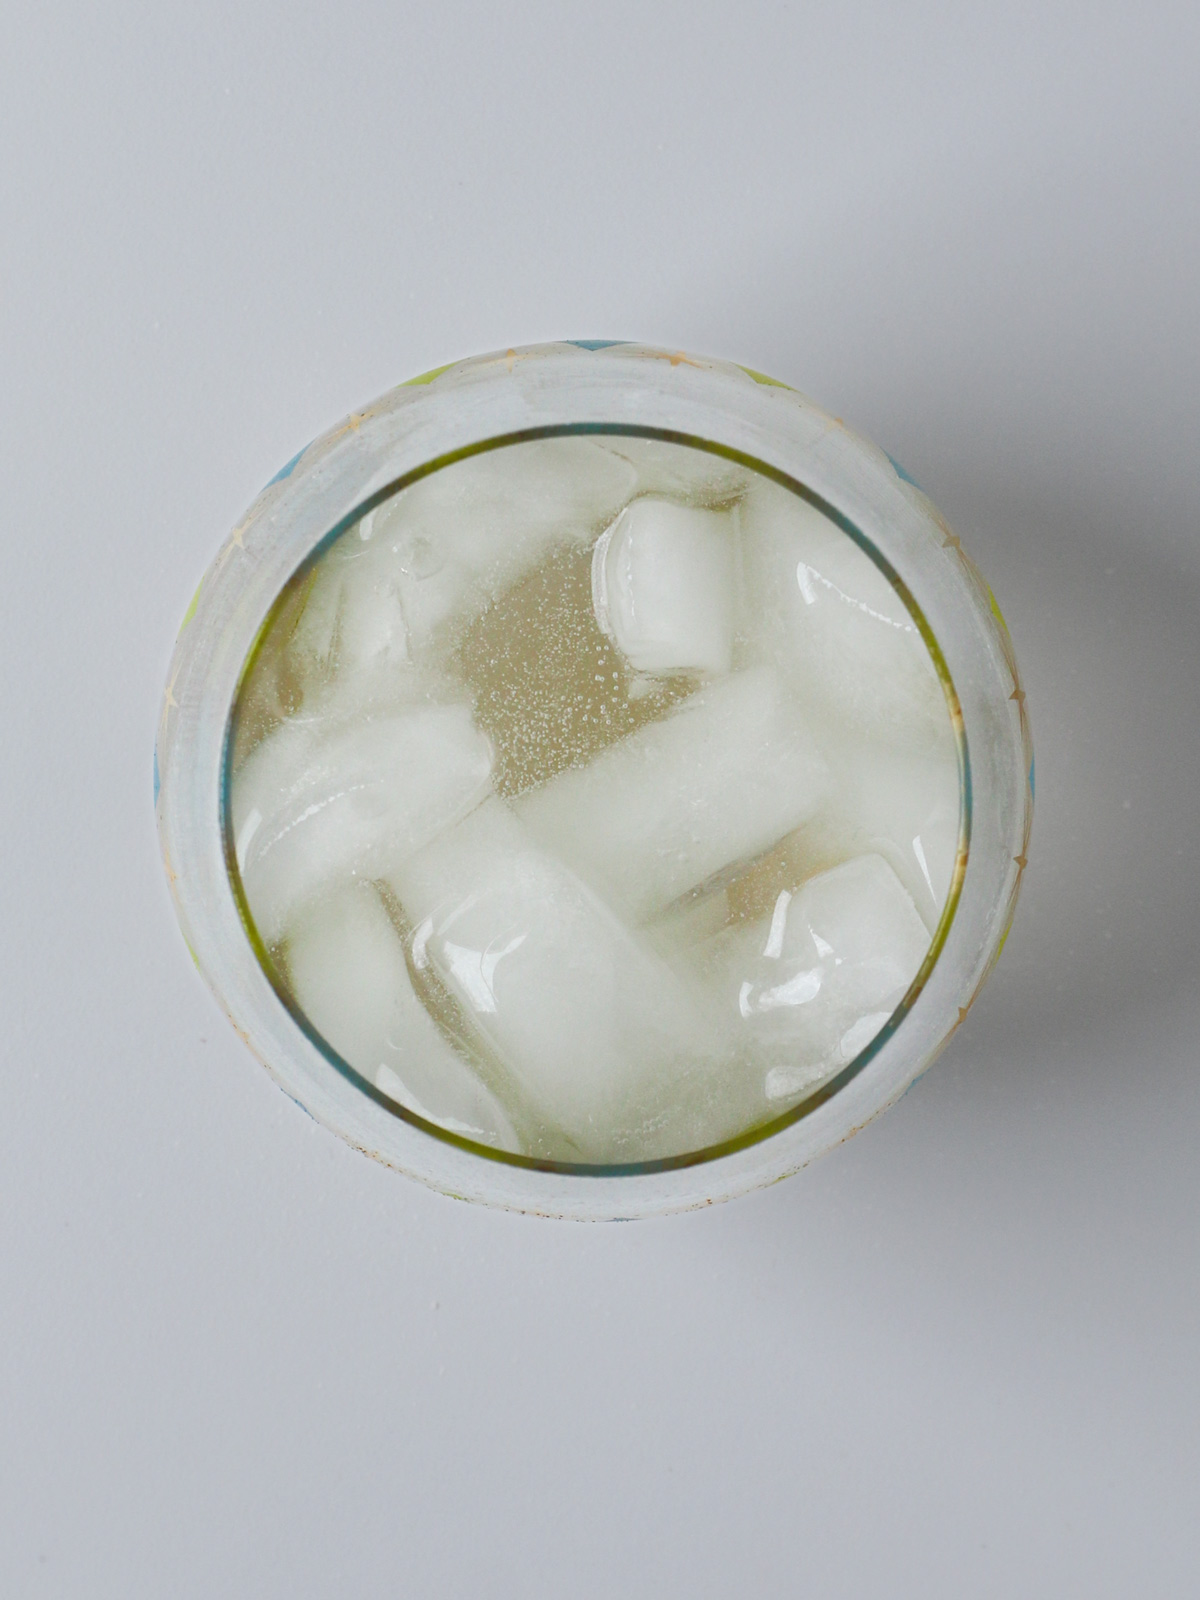 ginger ale on ice in the glass.